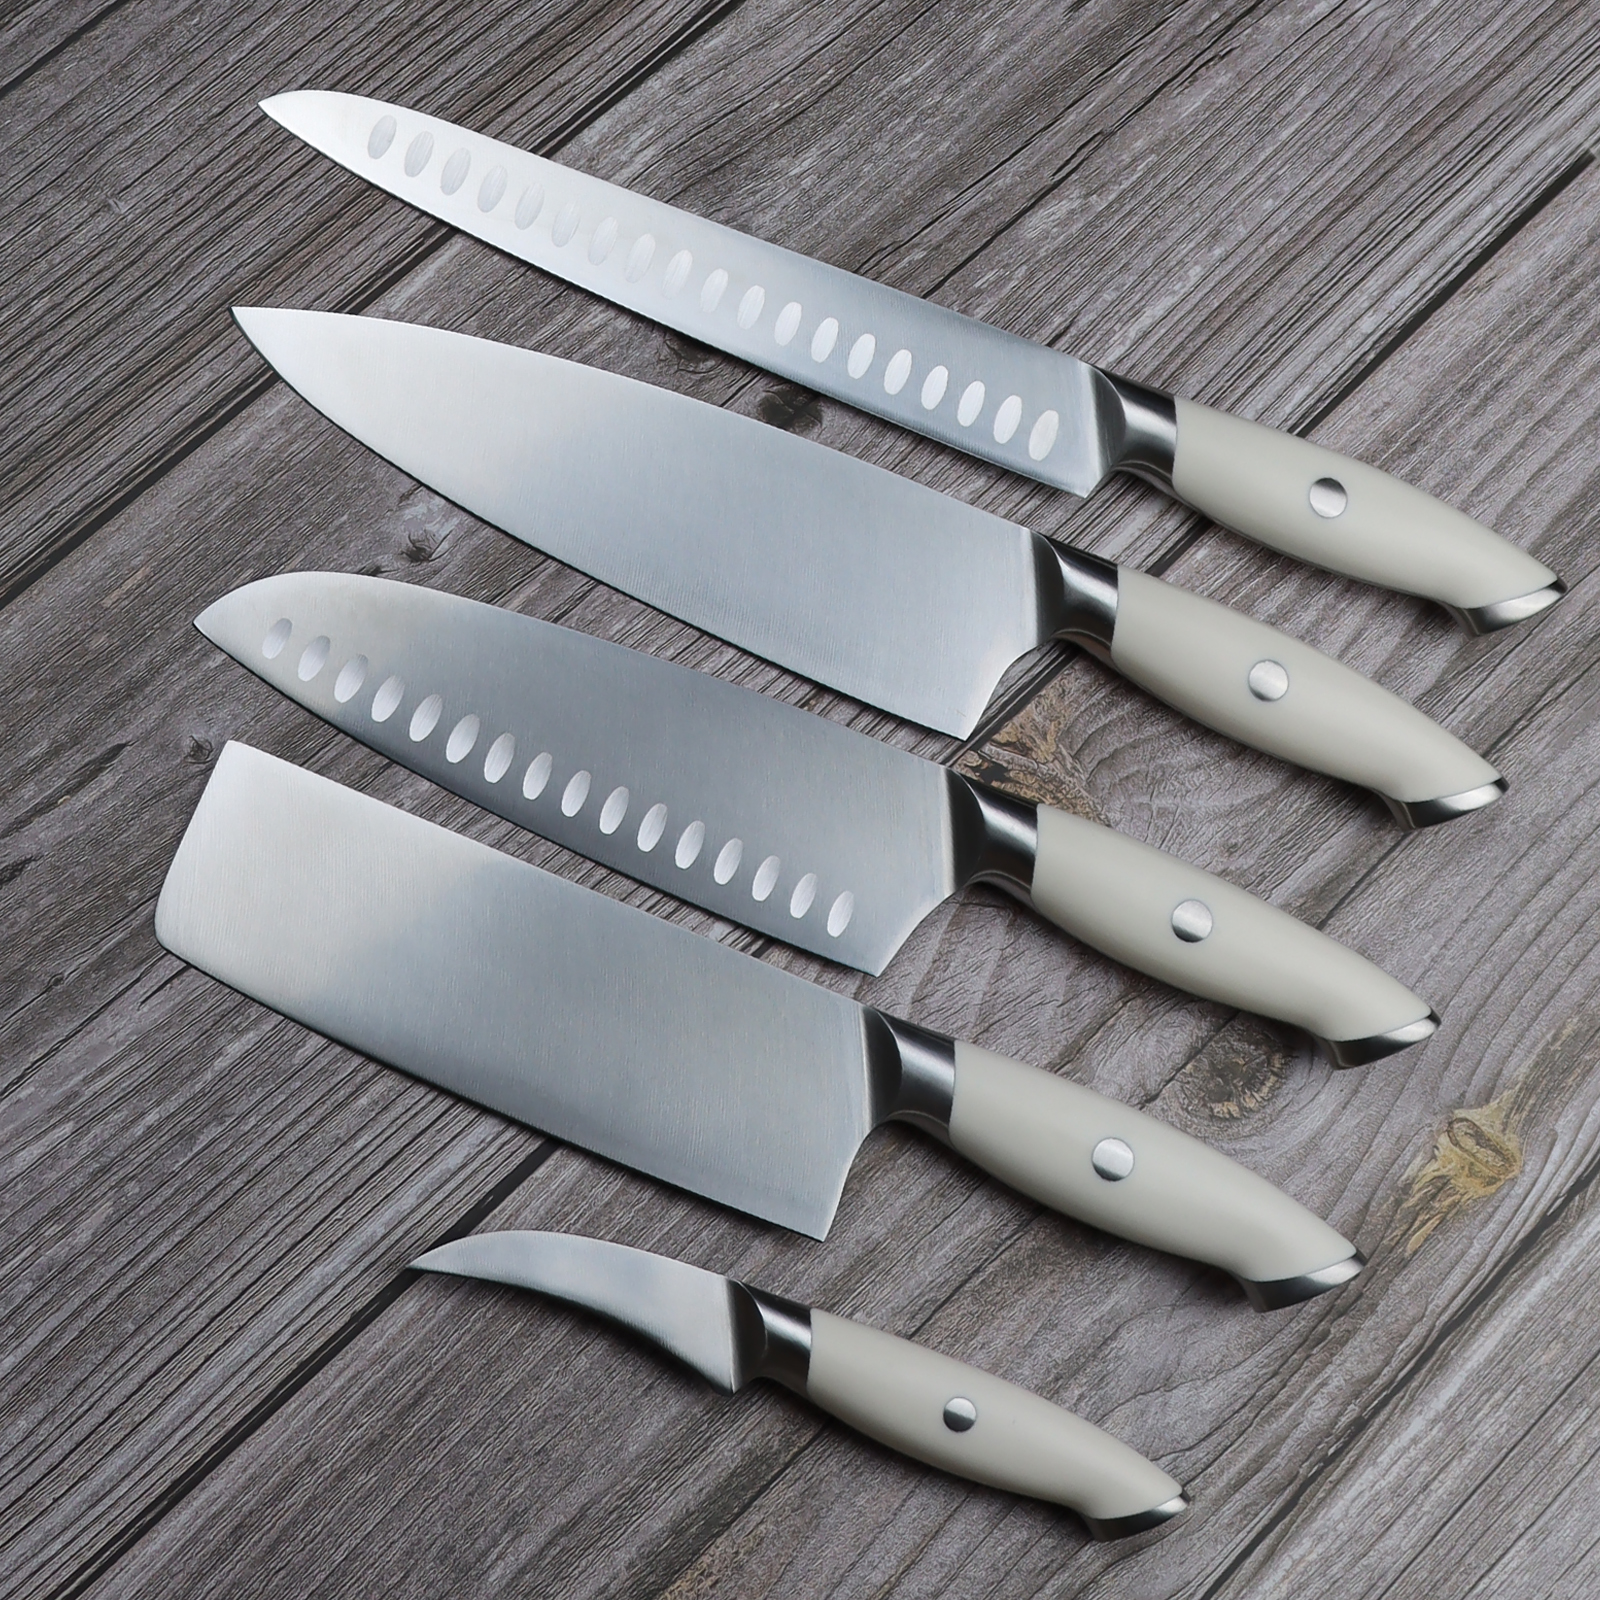 Stainless Steel Knife Set - 5 Piece